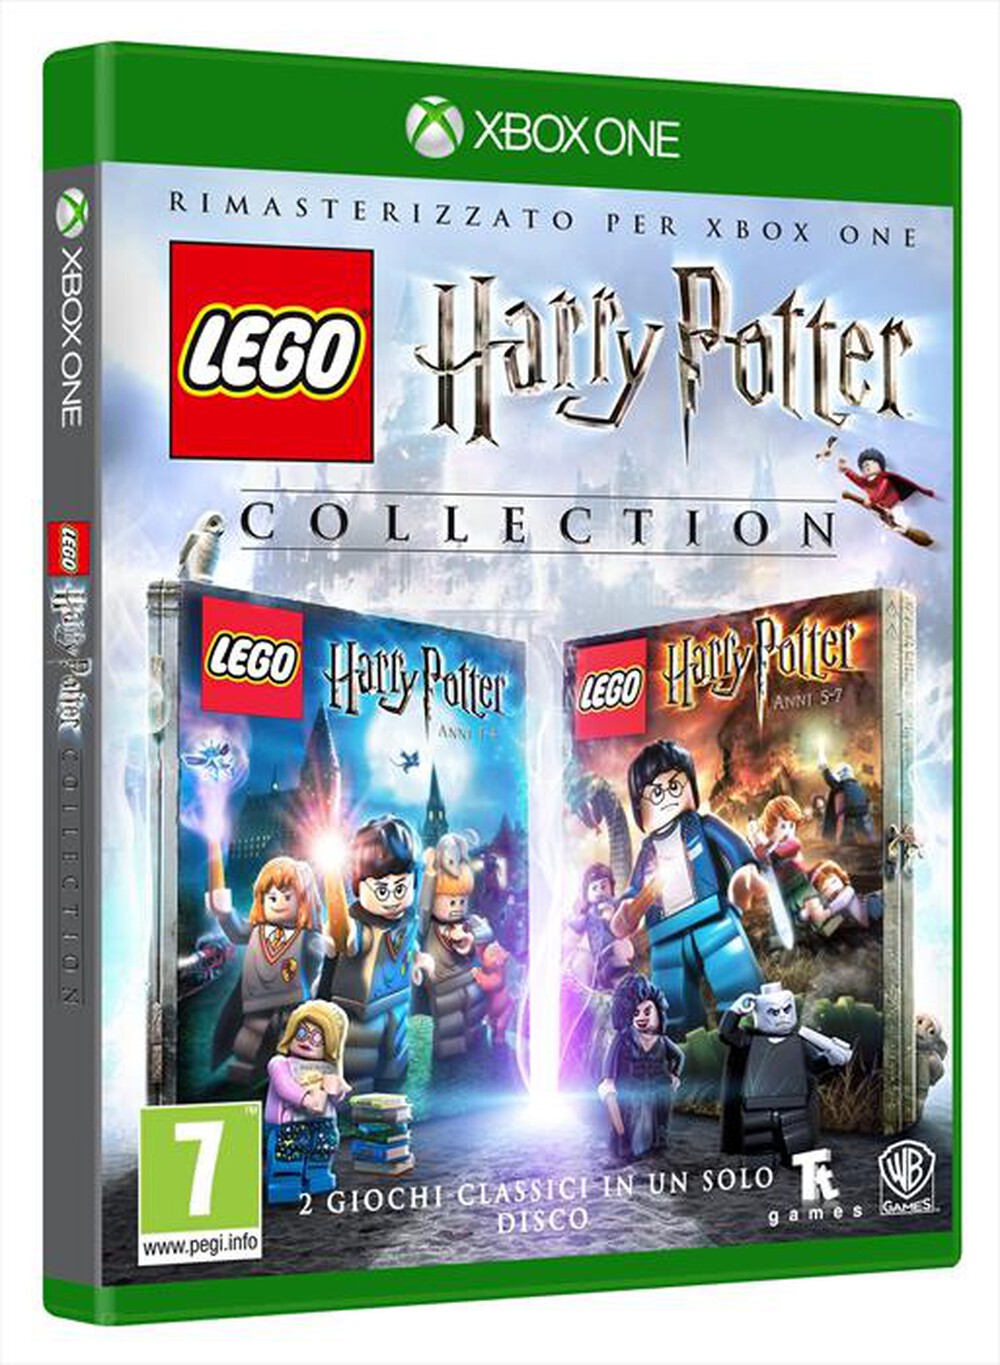 "WARNER GAMES - LEGO HARRY POTTER COLLECTION X1"